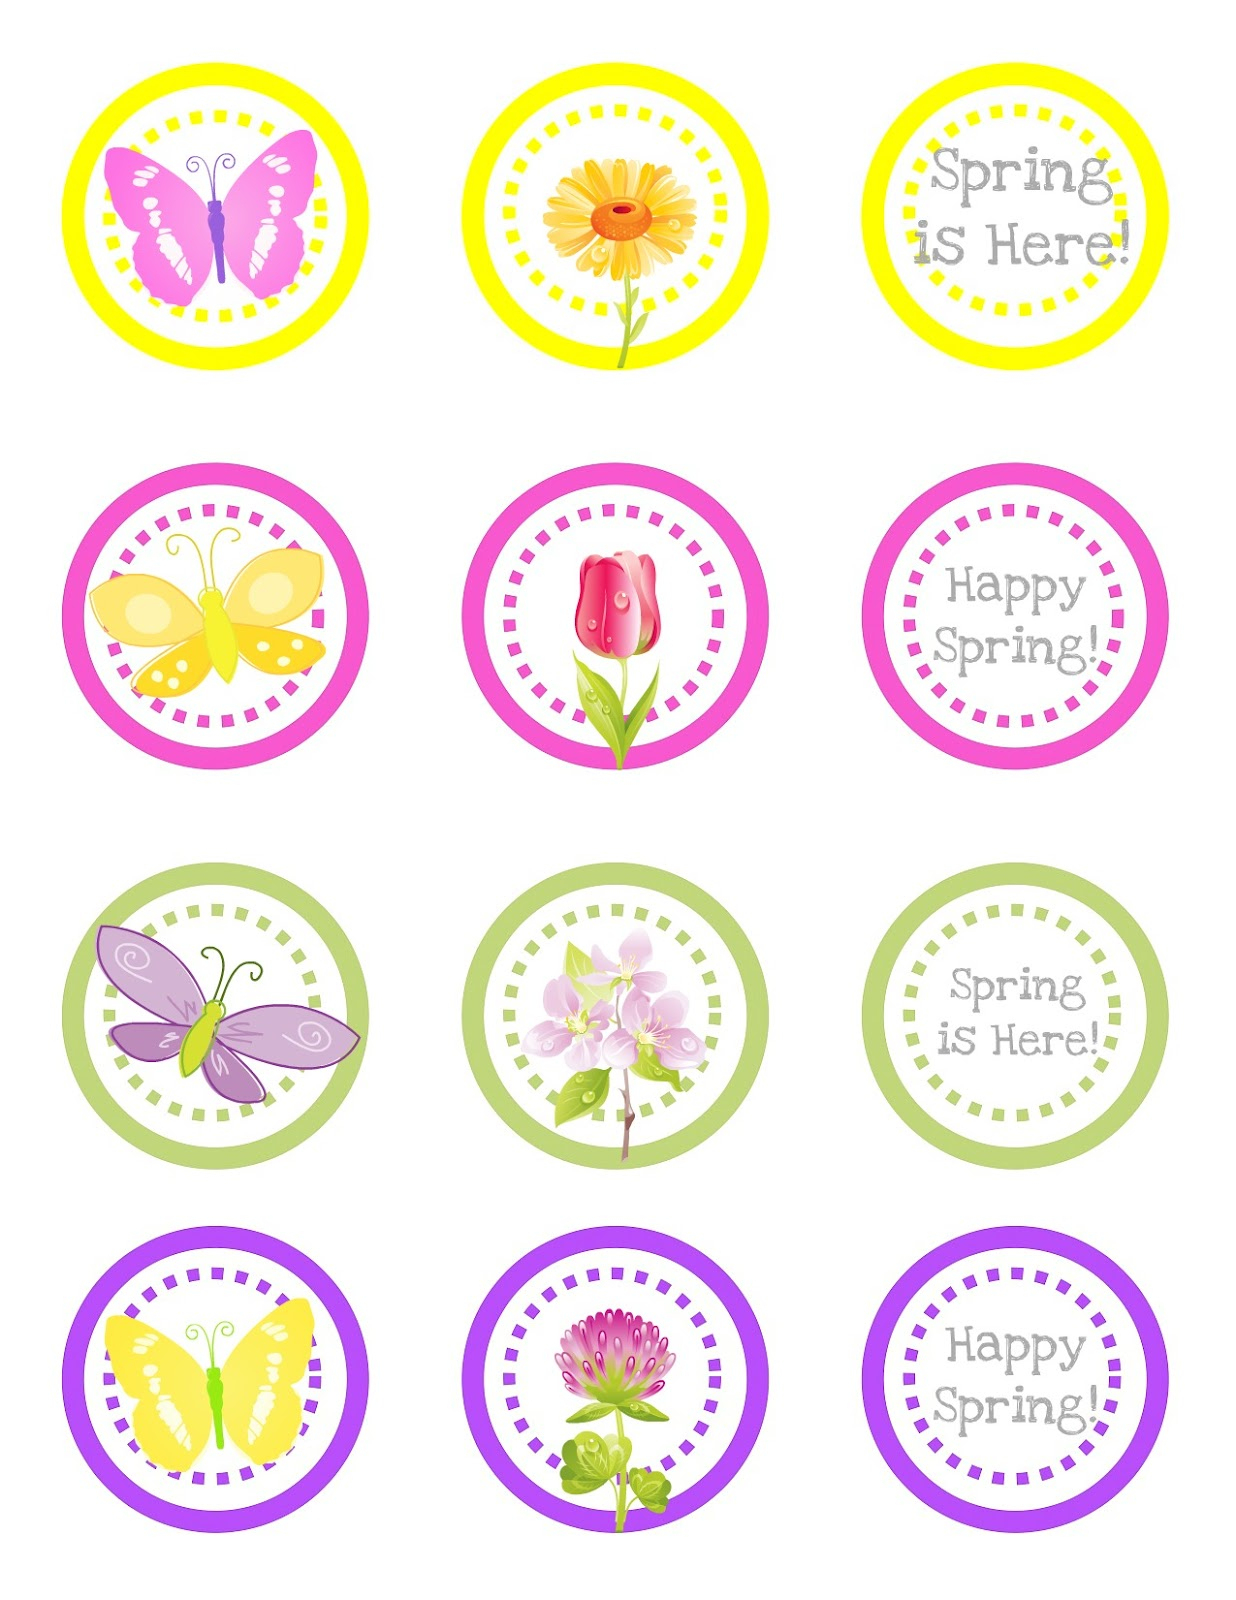 Free Printable} April Showers Bring May Flowers Printable - Creative - Free Printable Flowers